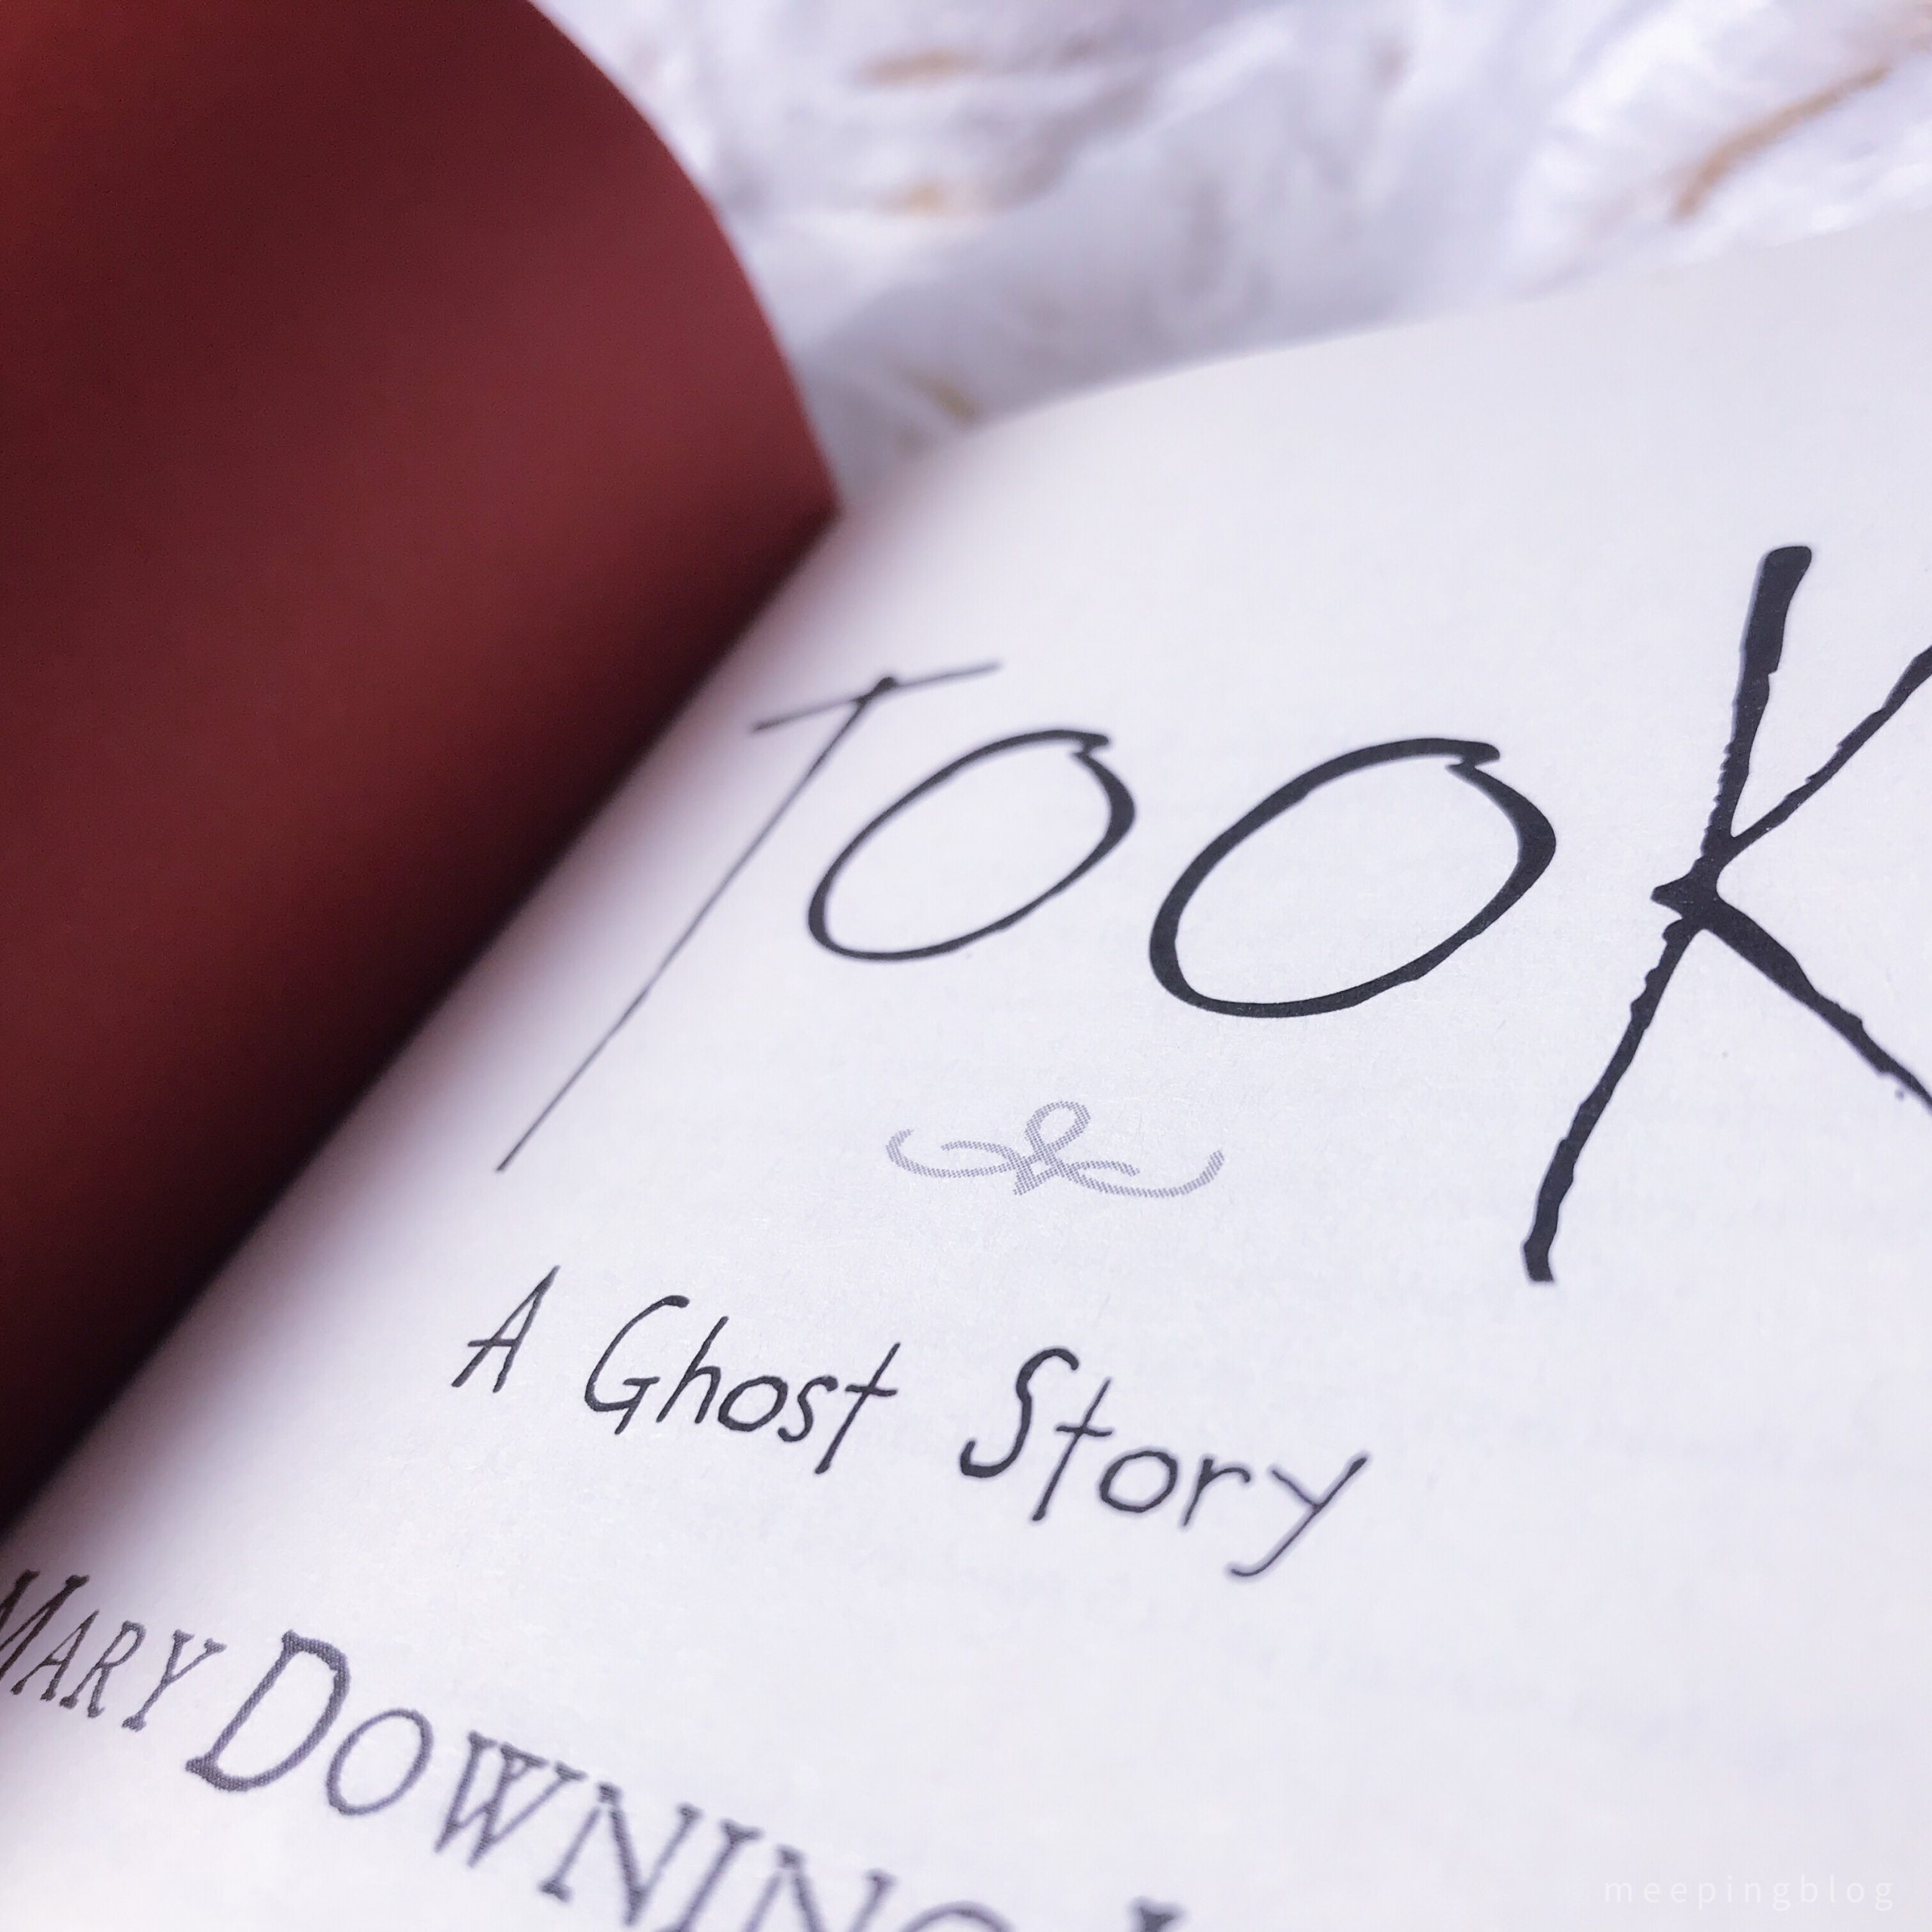 Took: A Ghost Story | Book Review